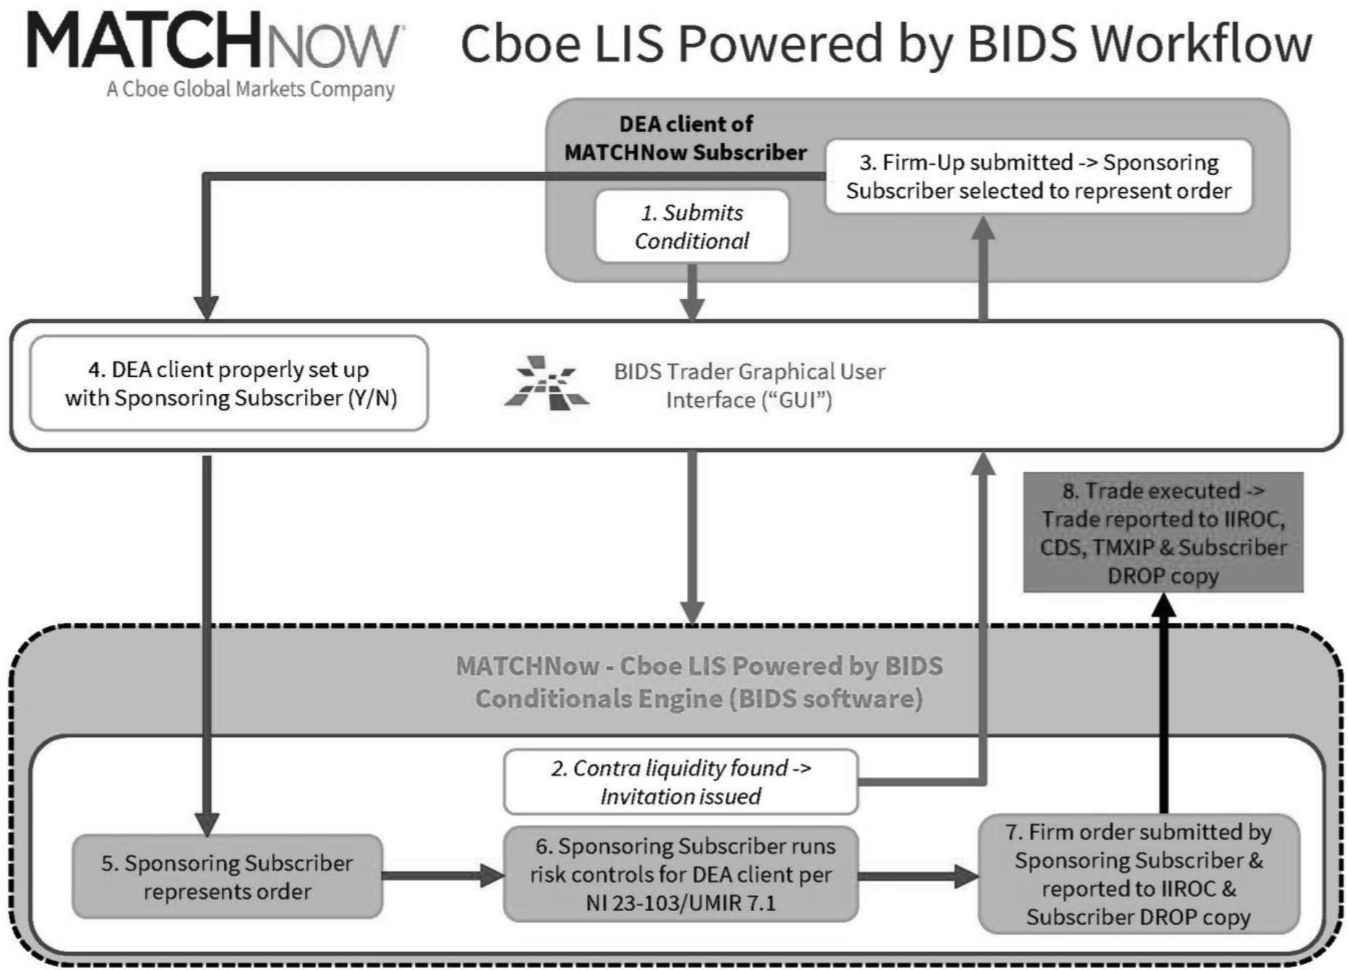 Cboe LIS Powered by BIDS Workflow